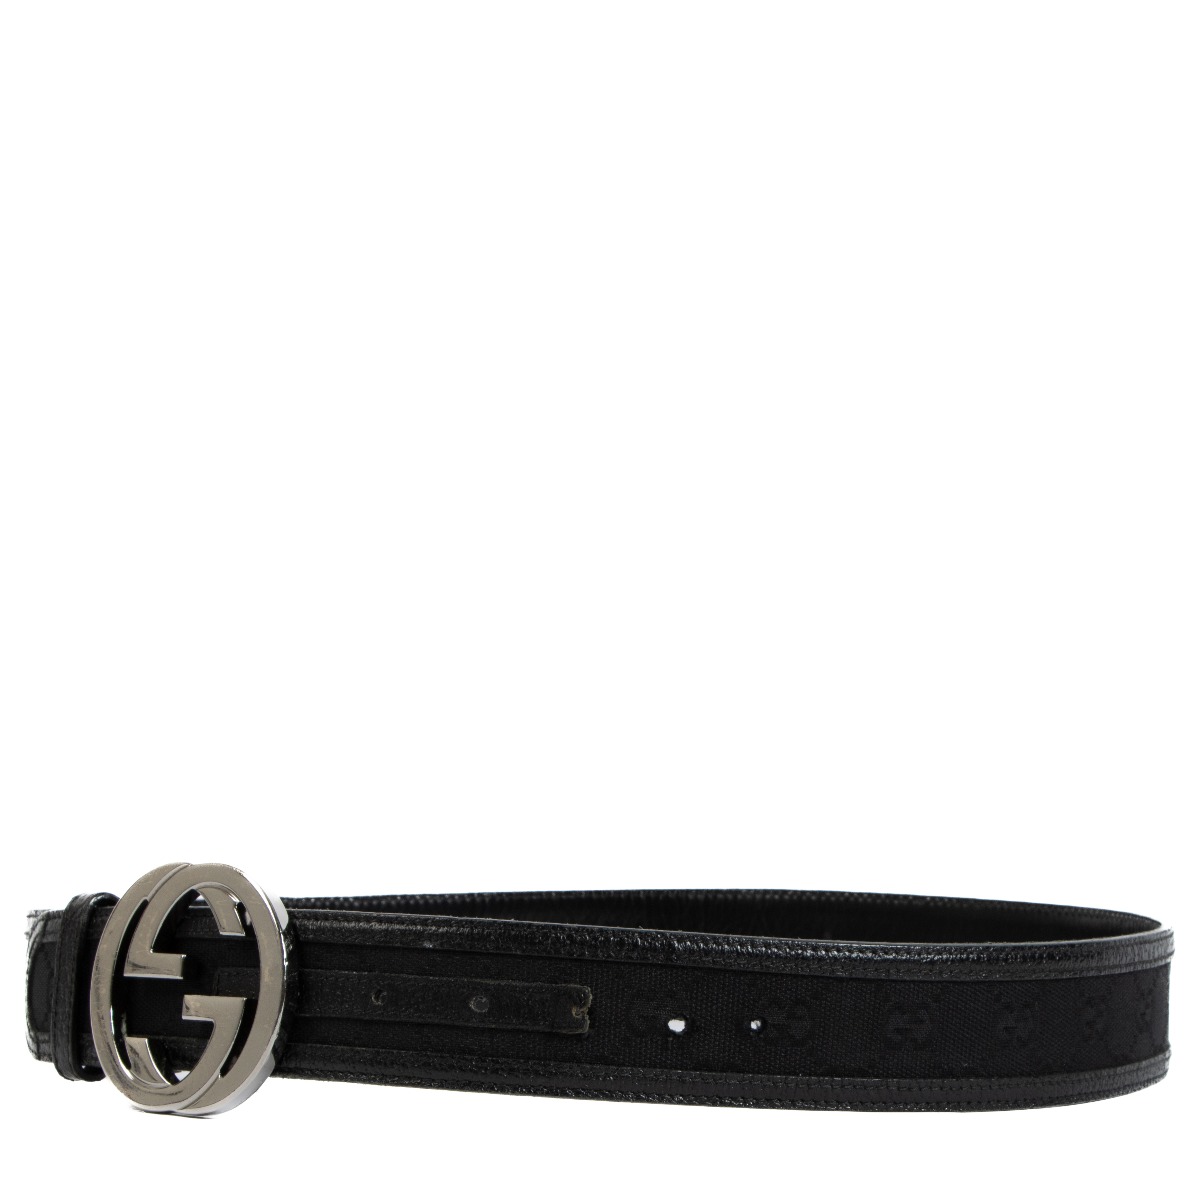 Gucci Guccisssima Brown and Beige Canvas Leather Trim Belt Size 36/90 –  Queen Bee of Beverly Hills